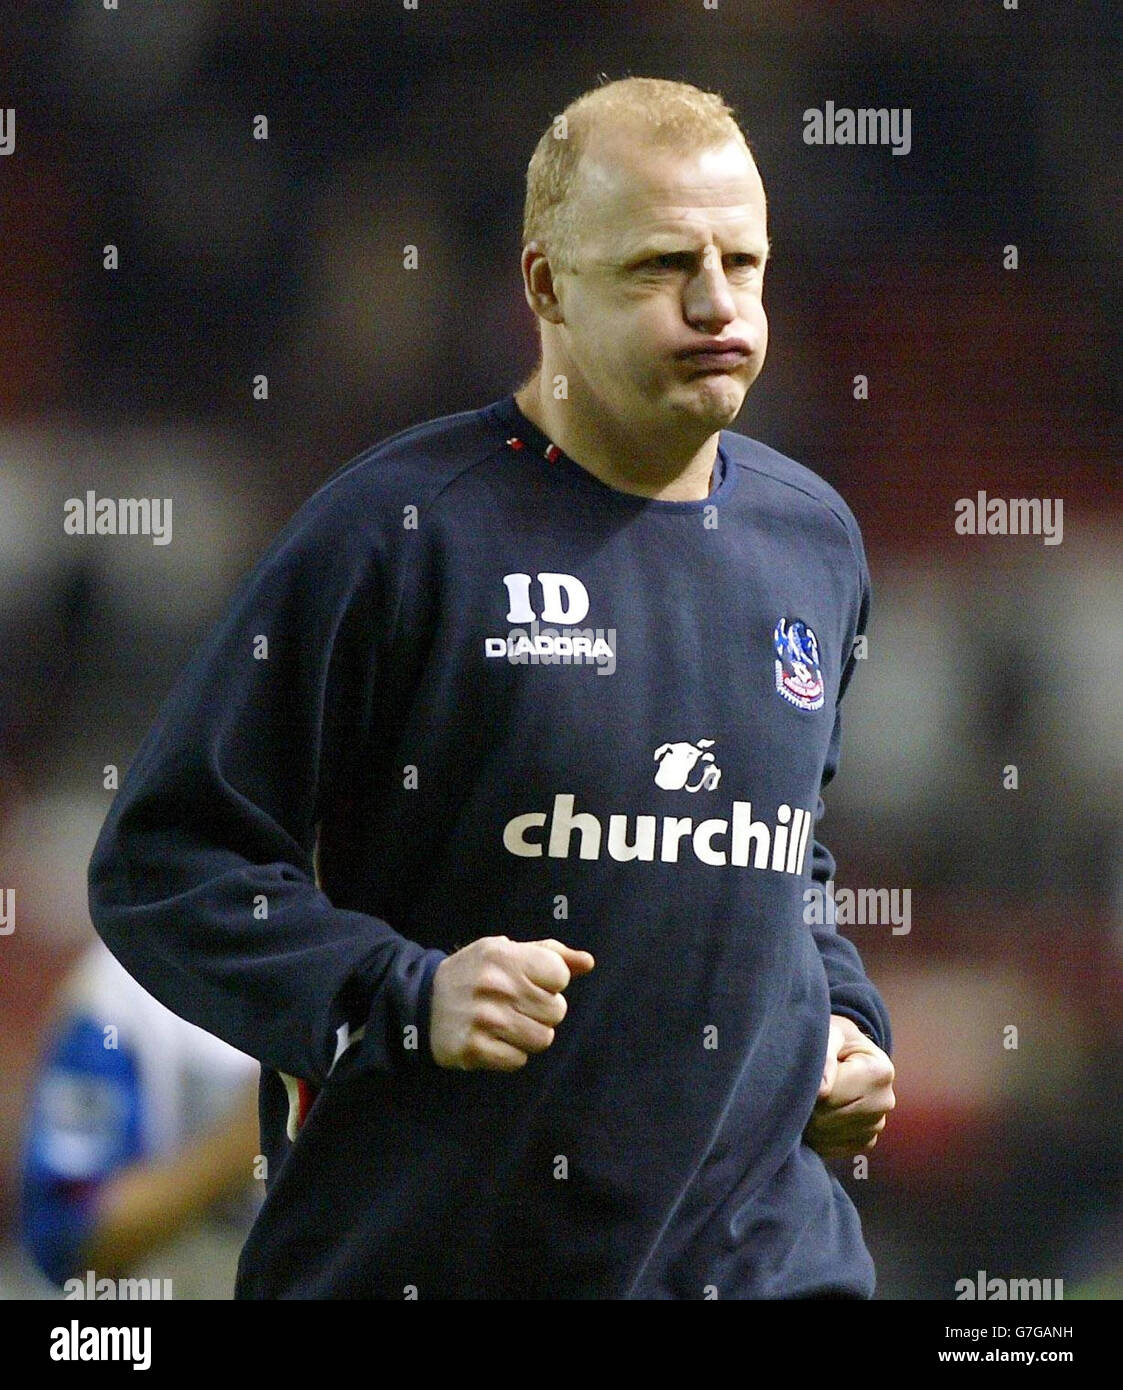 Crystal Palace manager Ian Dowie leaves the pitch after his teams 5-2 defeat. Stock Photo